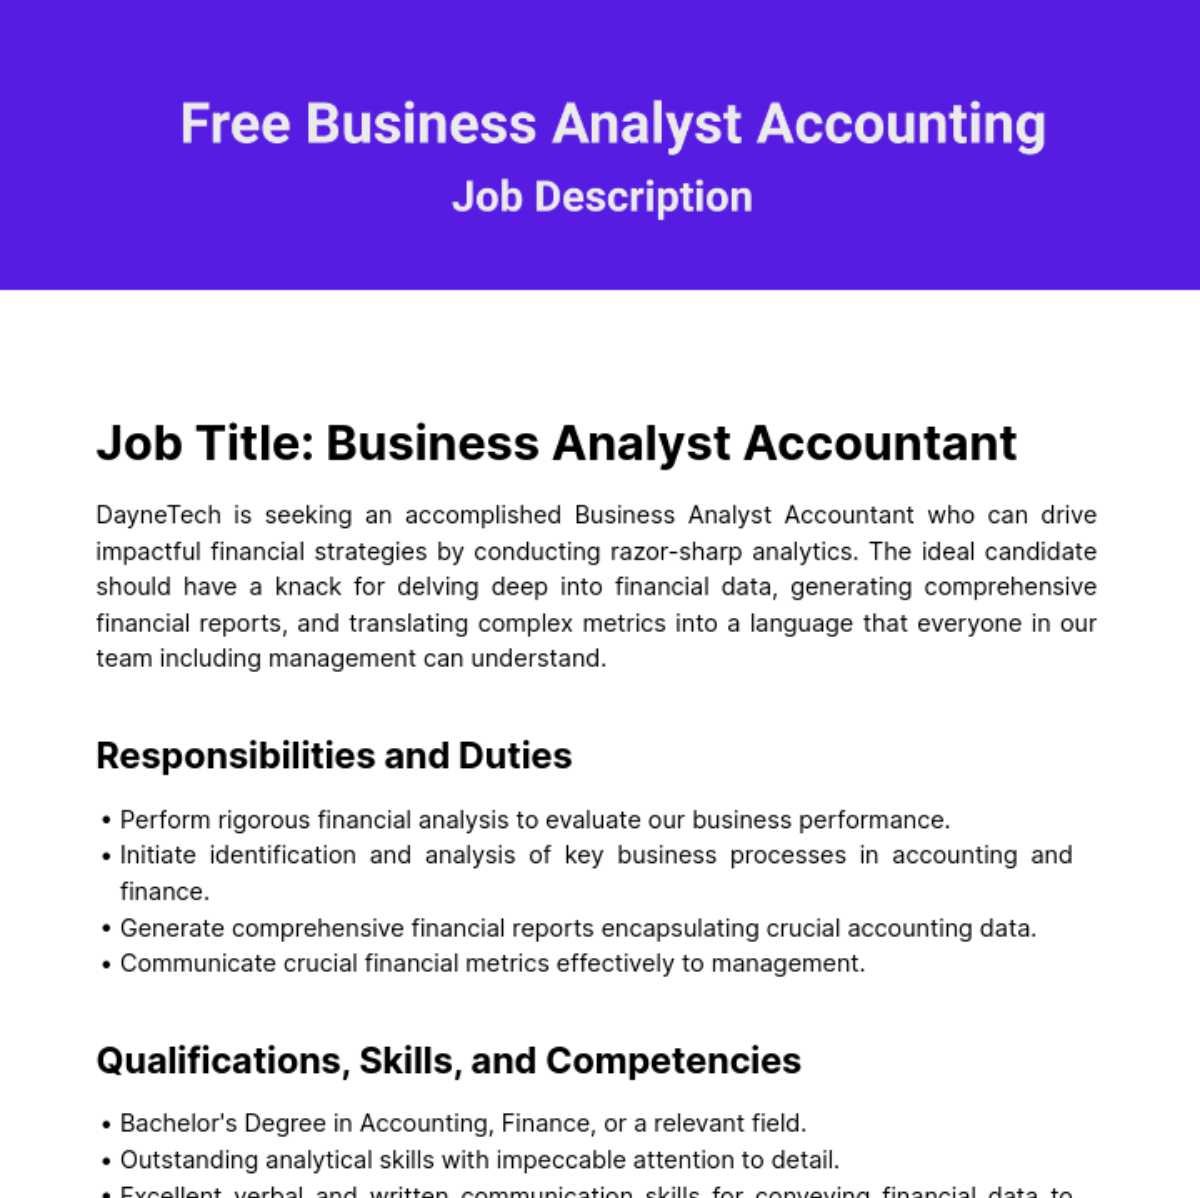 Business Analyst Accounting Job Description Template